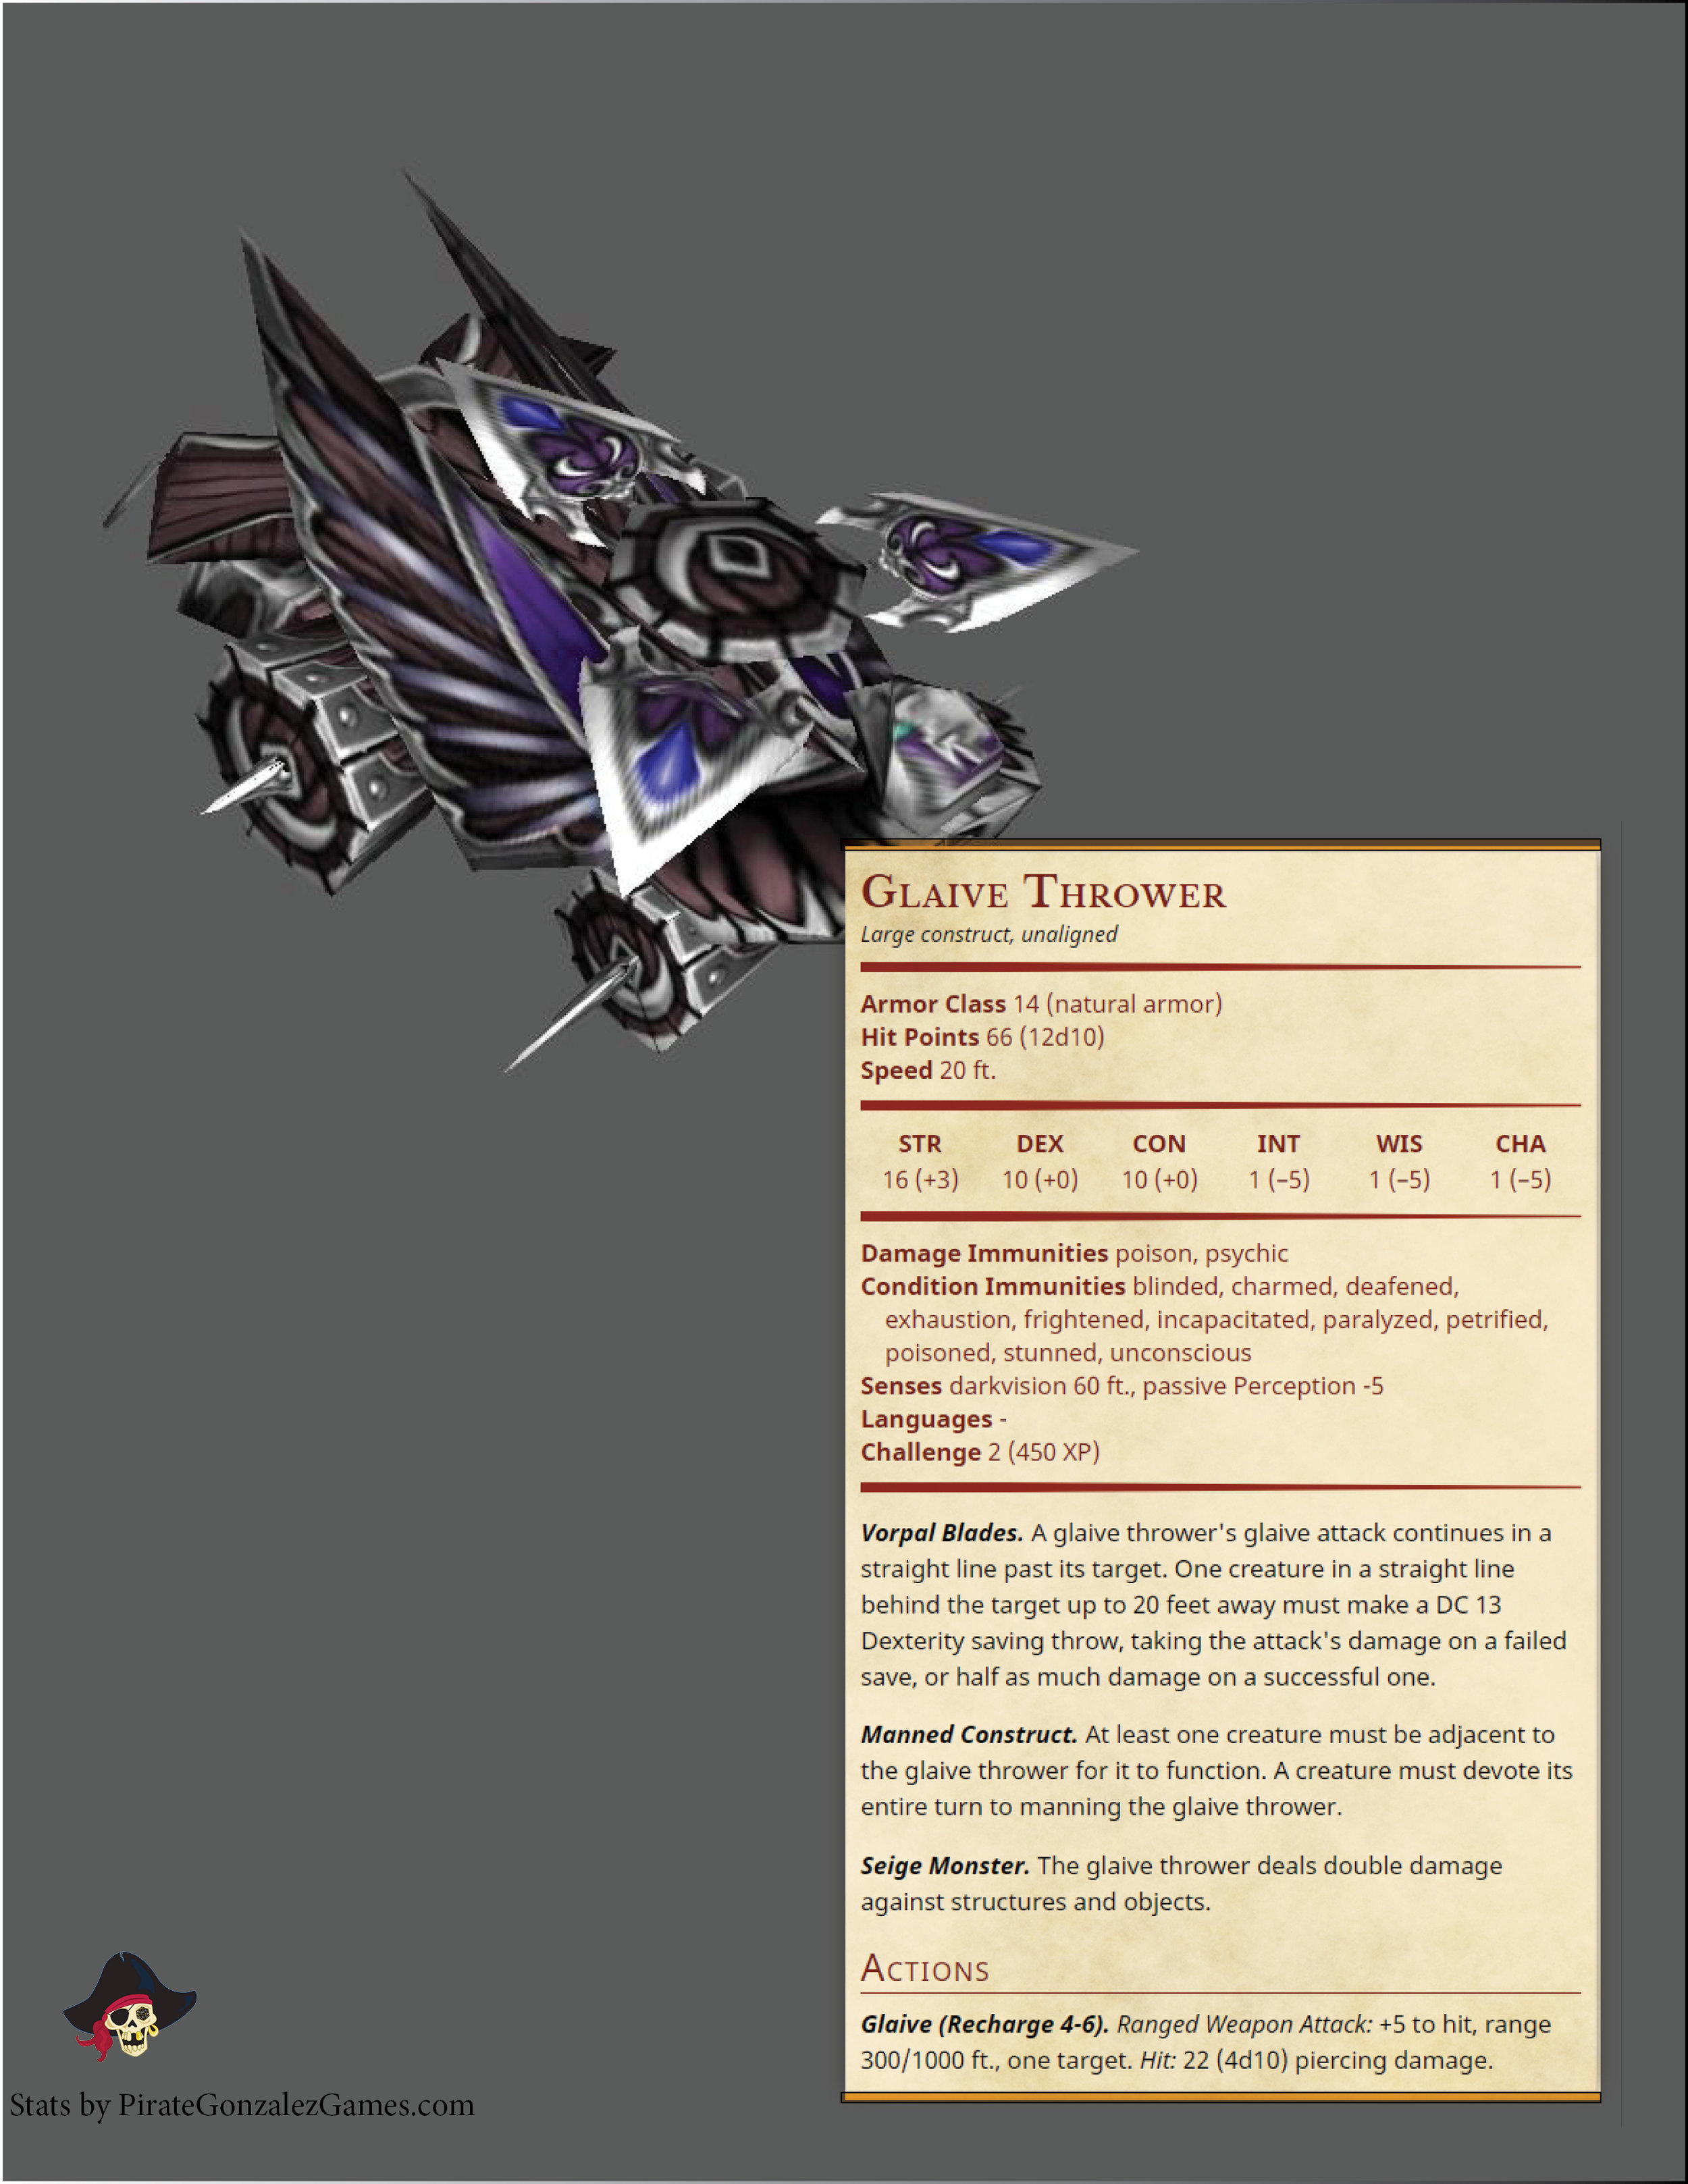 Glaive Thrower